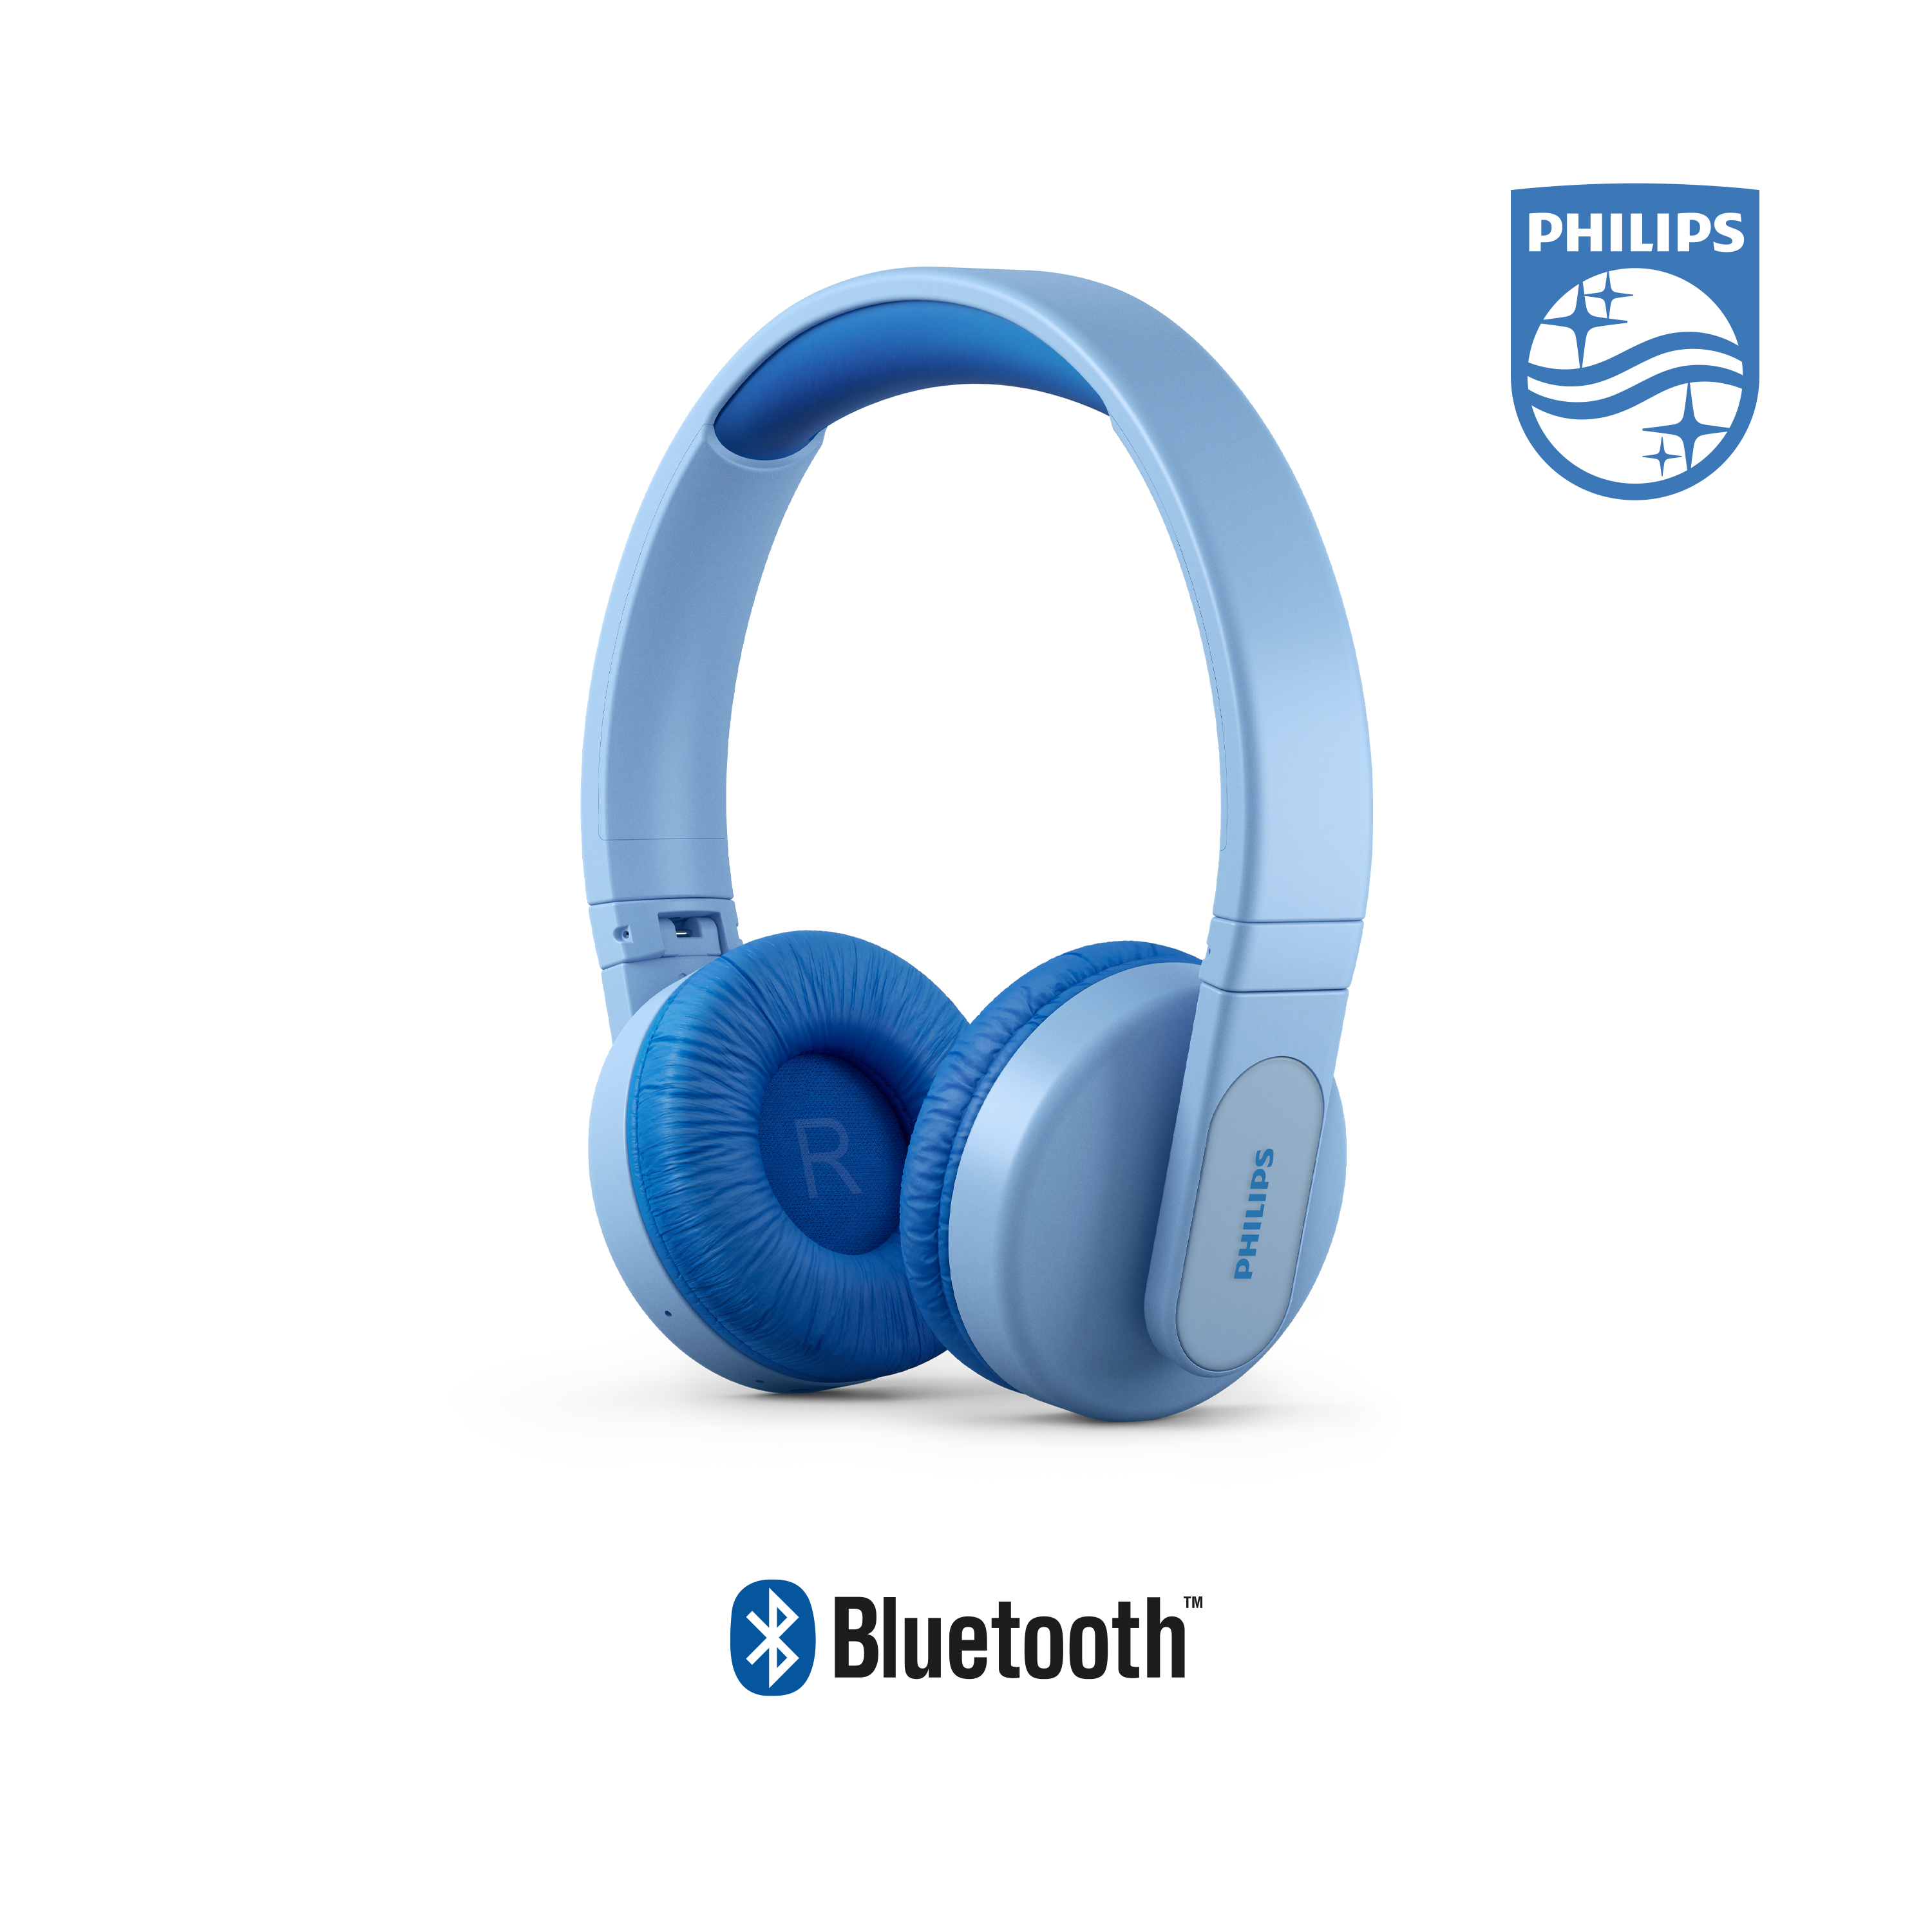 Philips K4206 Kids Wireless on-Ear Headphones with Parental Controls, Blue, TAK4206BL - image 1 of 11